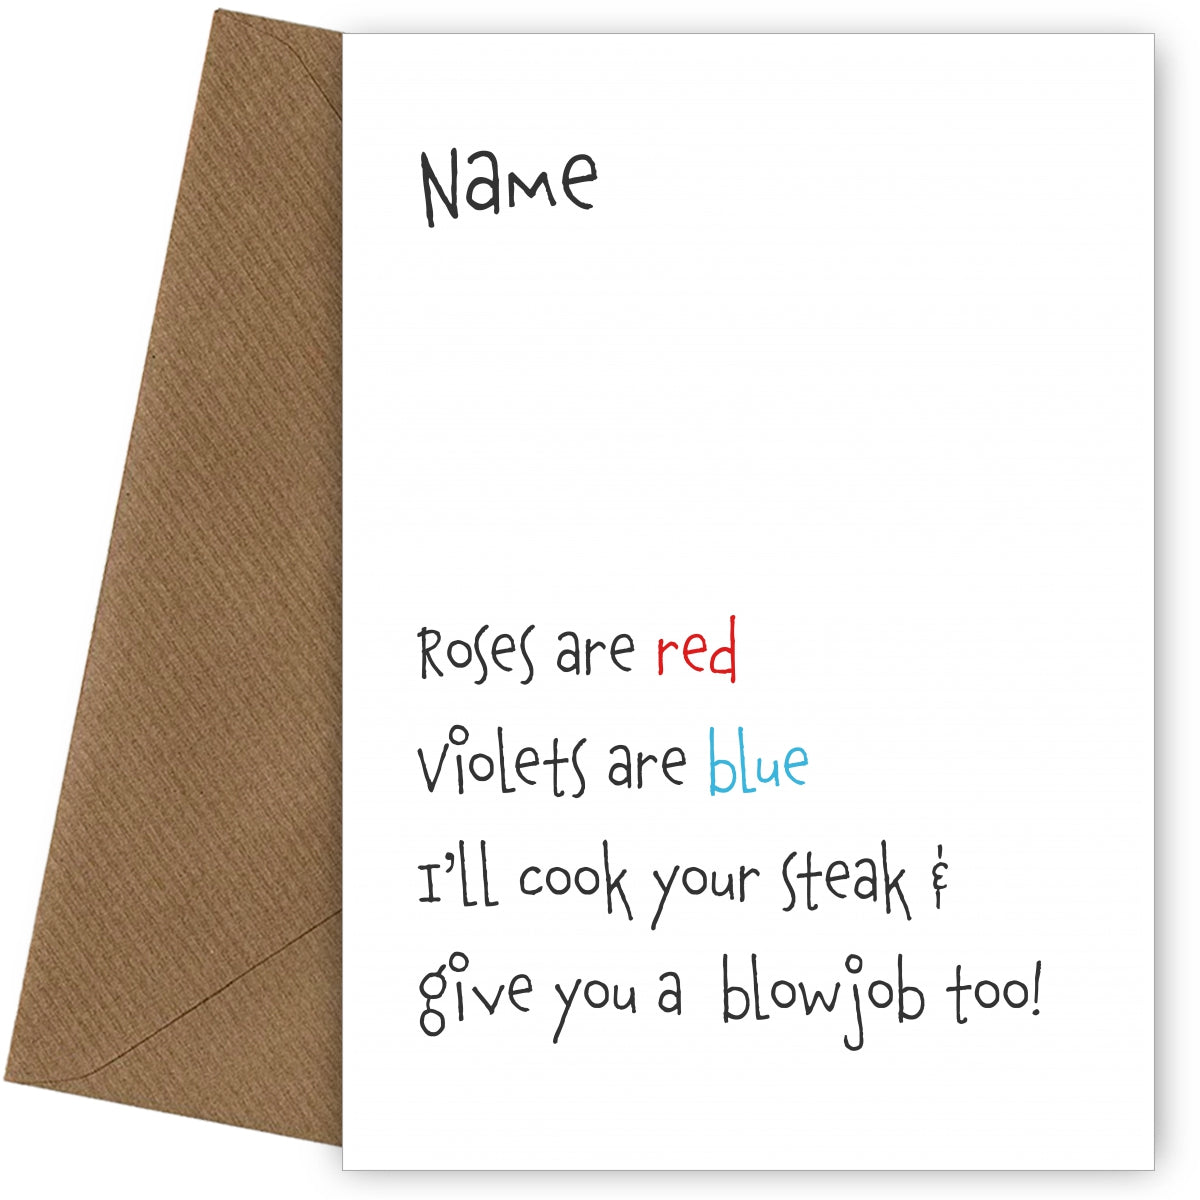 Steak and BJ Card for Boyfriend or Husband - Adult Humour Roses are Red Rhyme